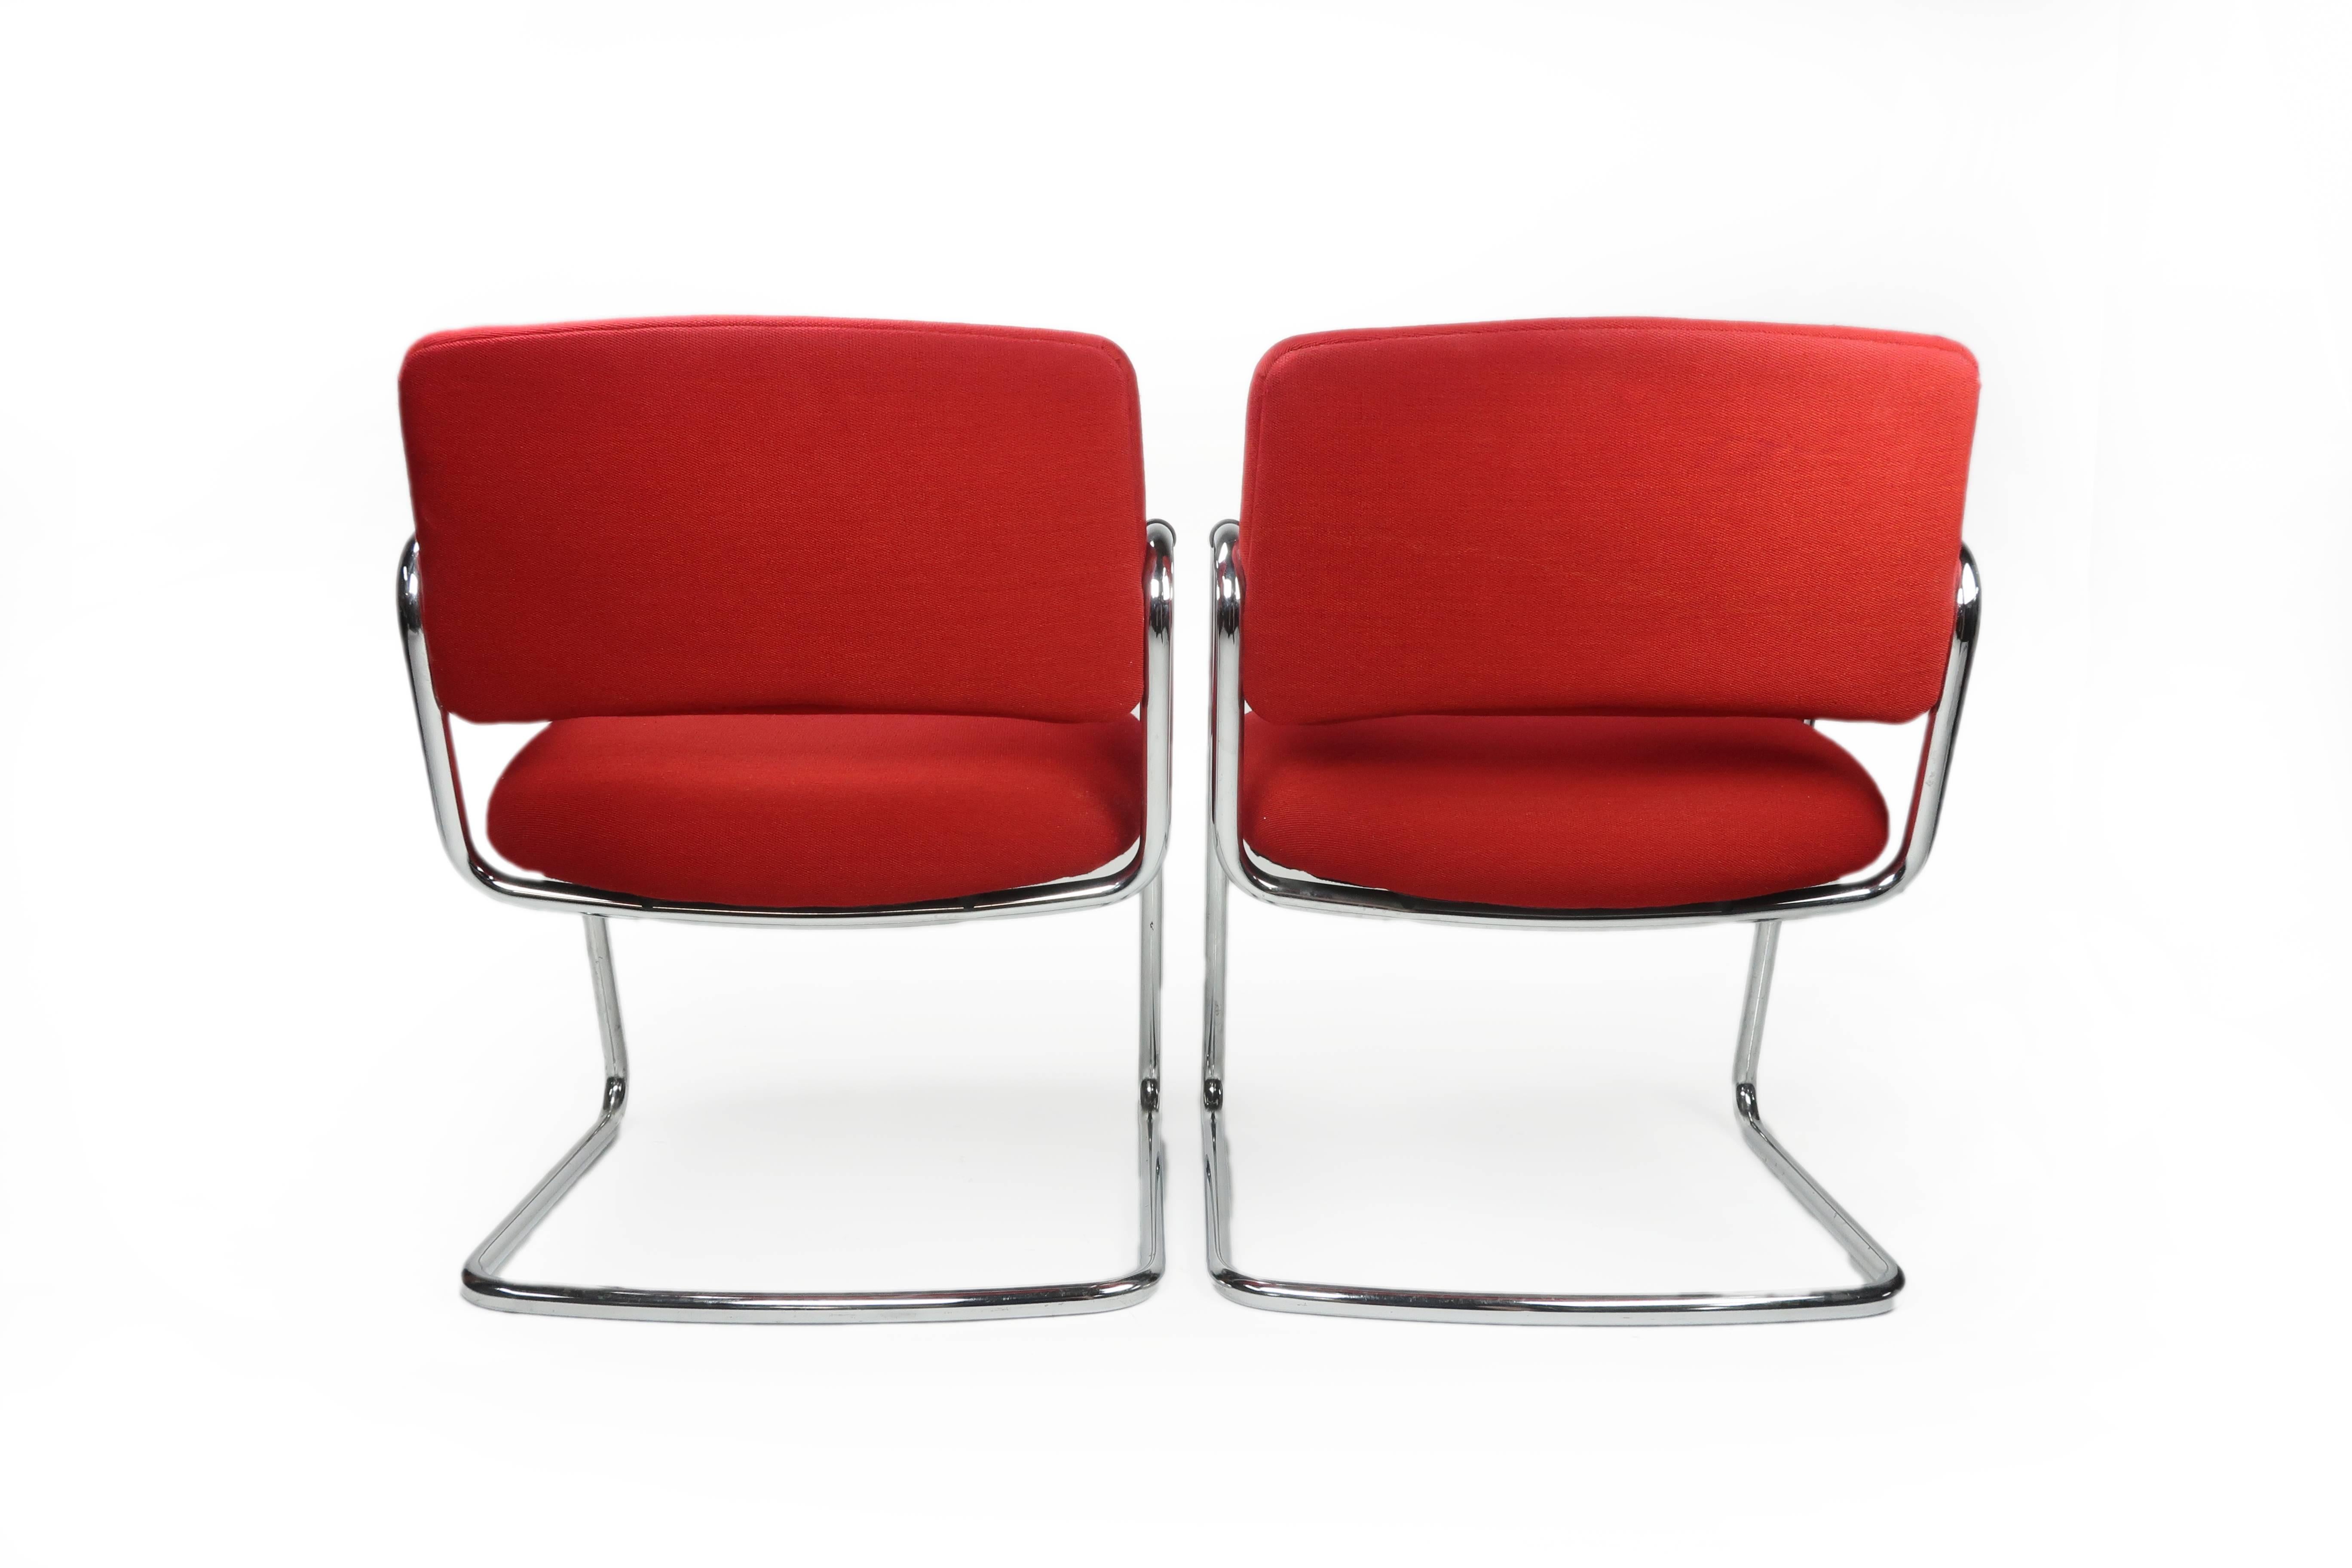 American Pair of Red Steelcase Chairs